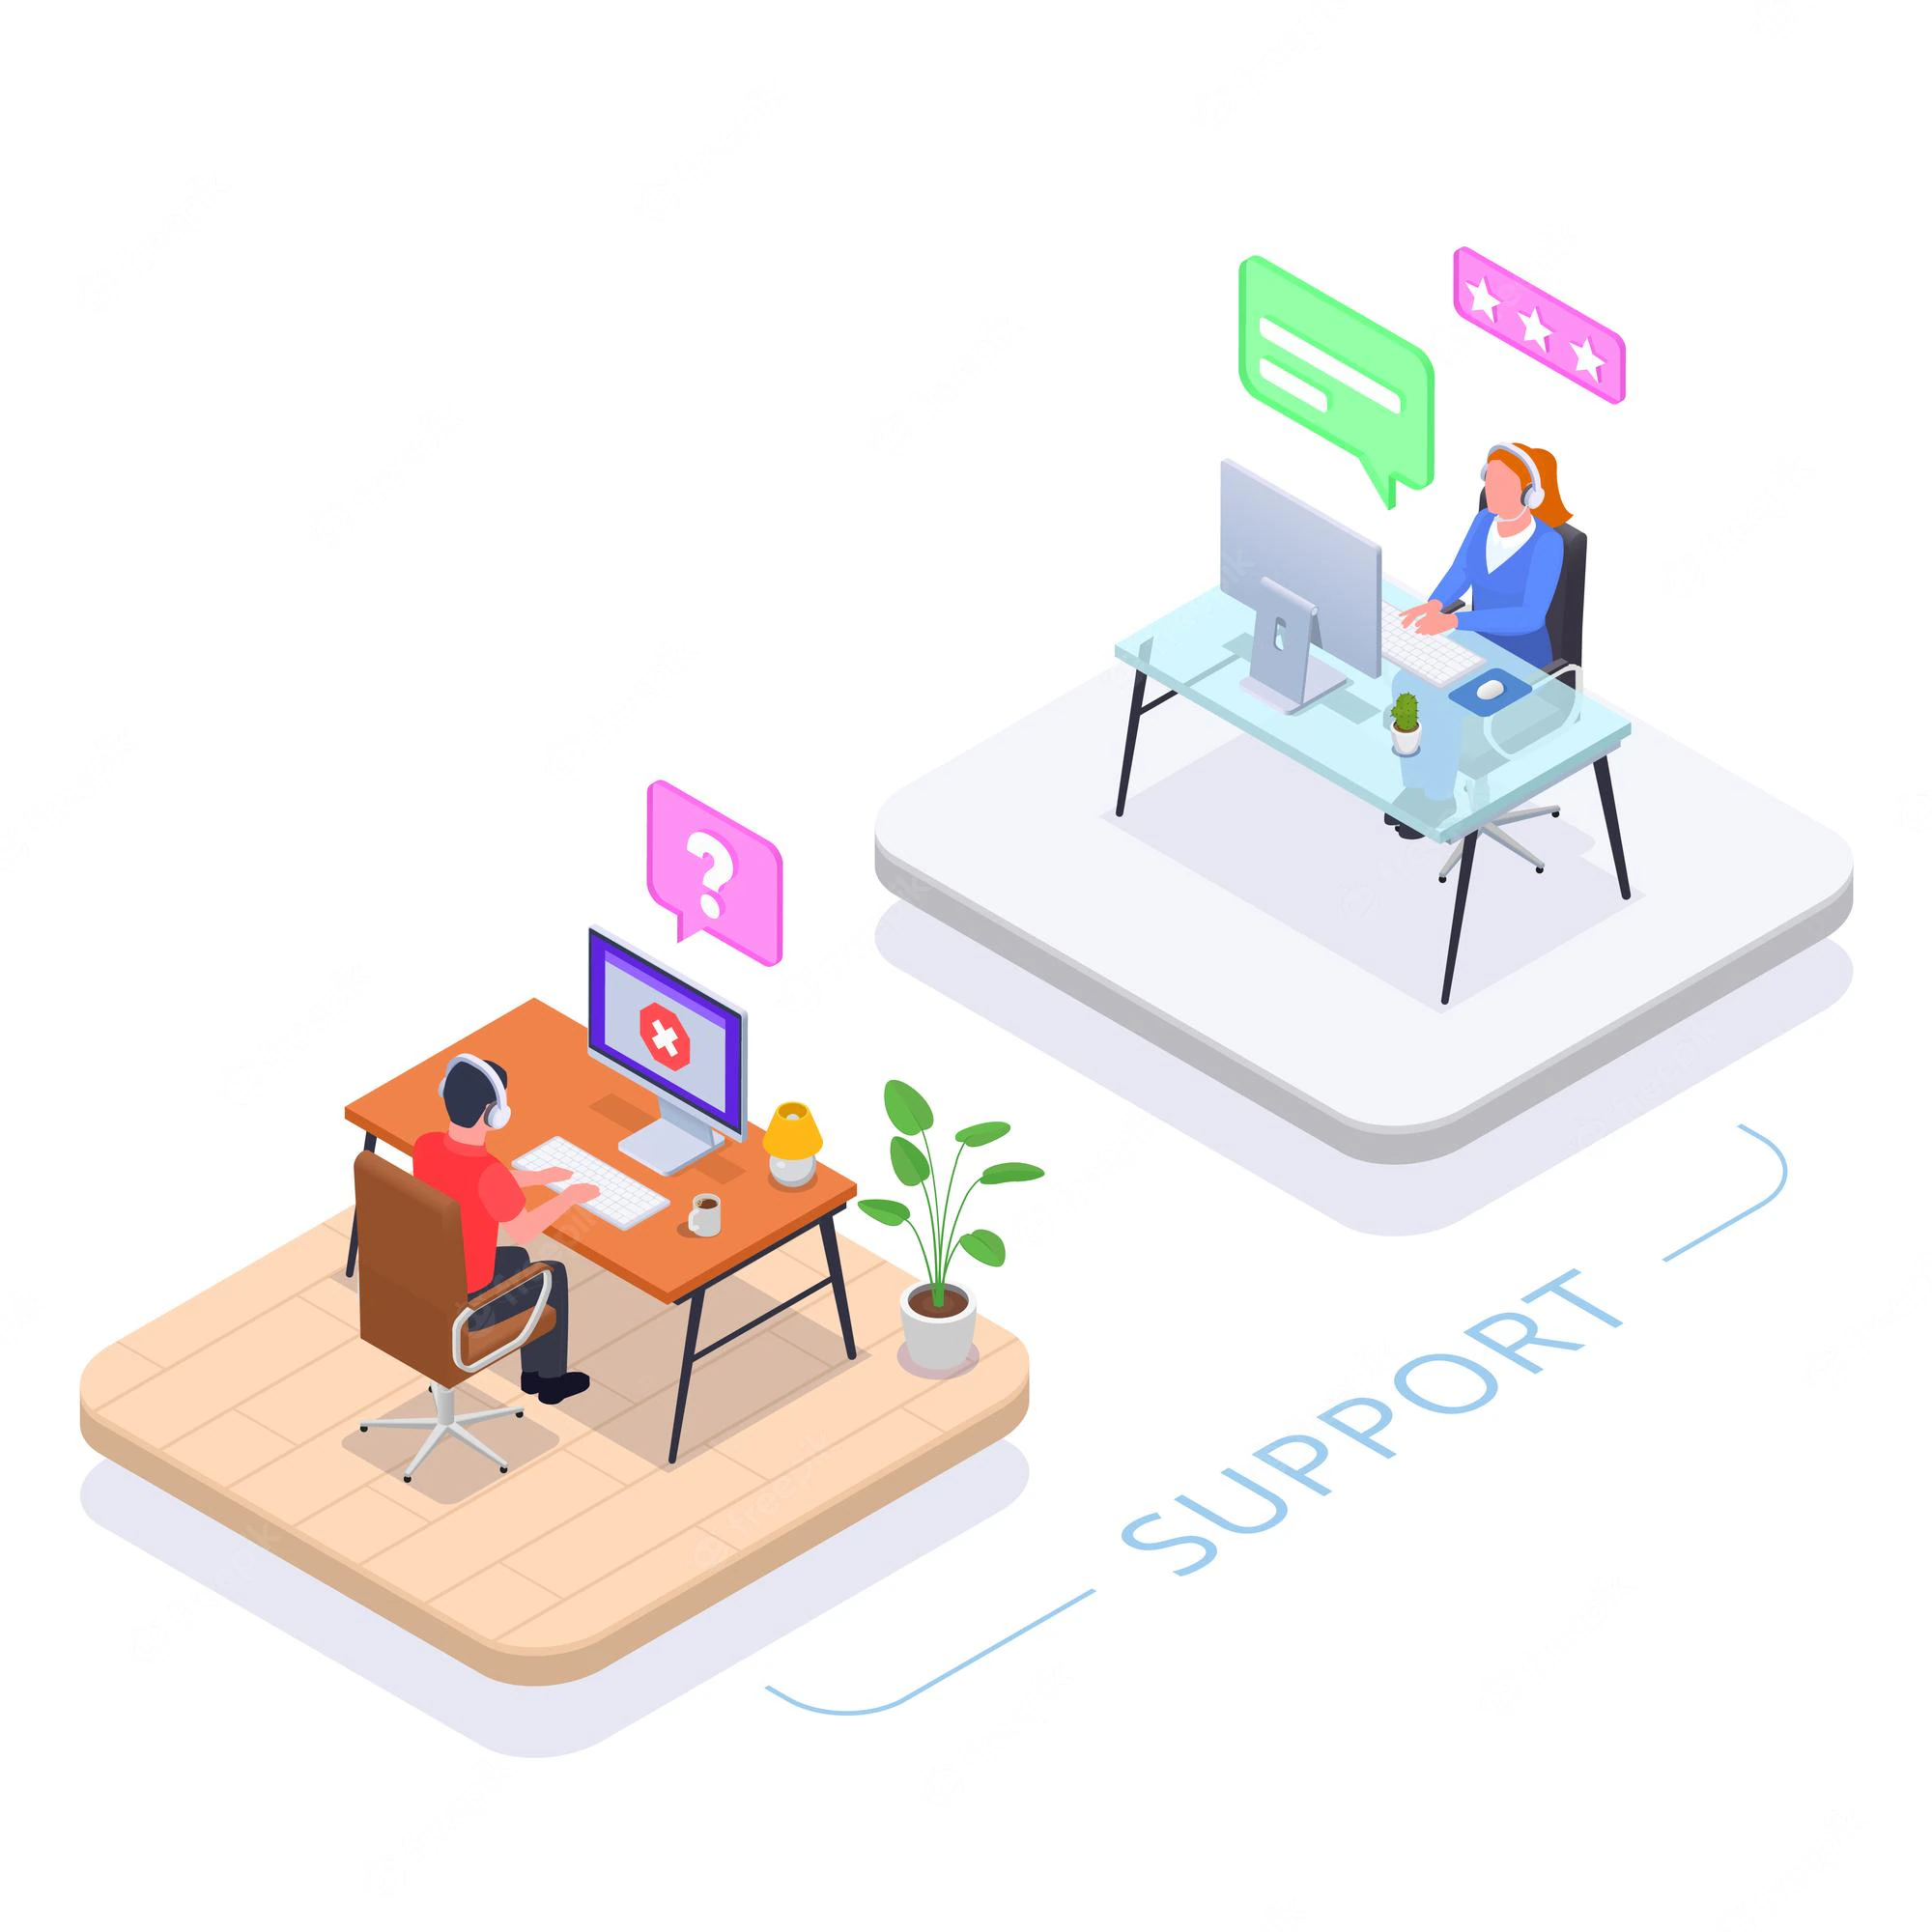 https://backoffice.uiii.ac.id/storage/image/call-center-helpdesk-concept-with-support-symbols-isometric-vector-illustration_1284-69102 (1) - 20230619151512.jpeg